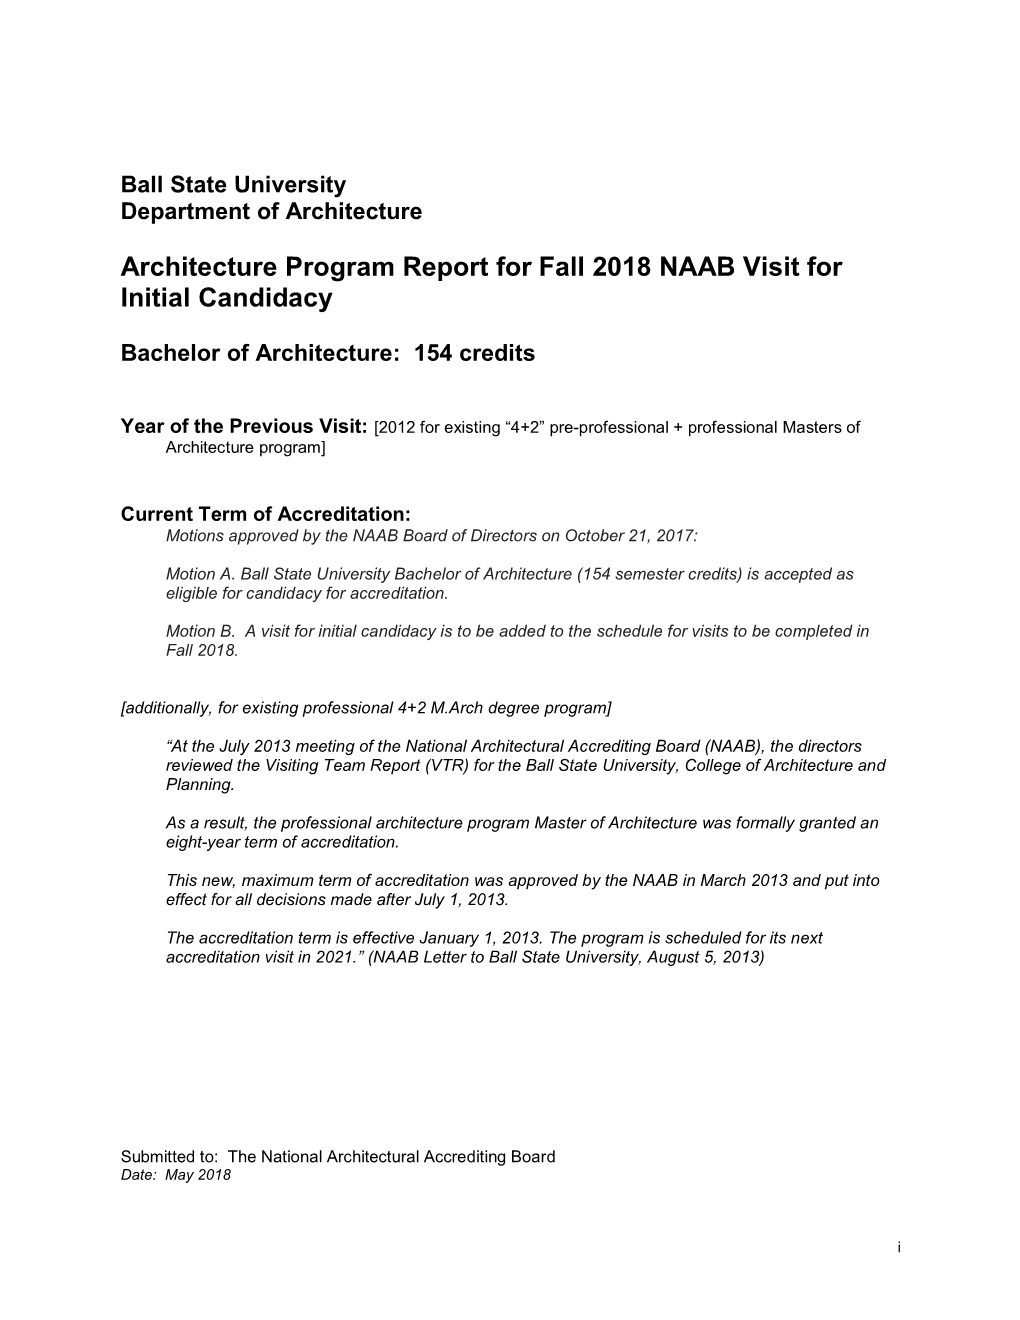 Architecture Program Report for Fall 2018 NAAB Visit for Initial Candidacy